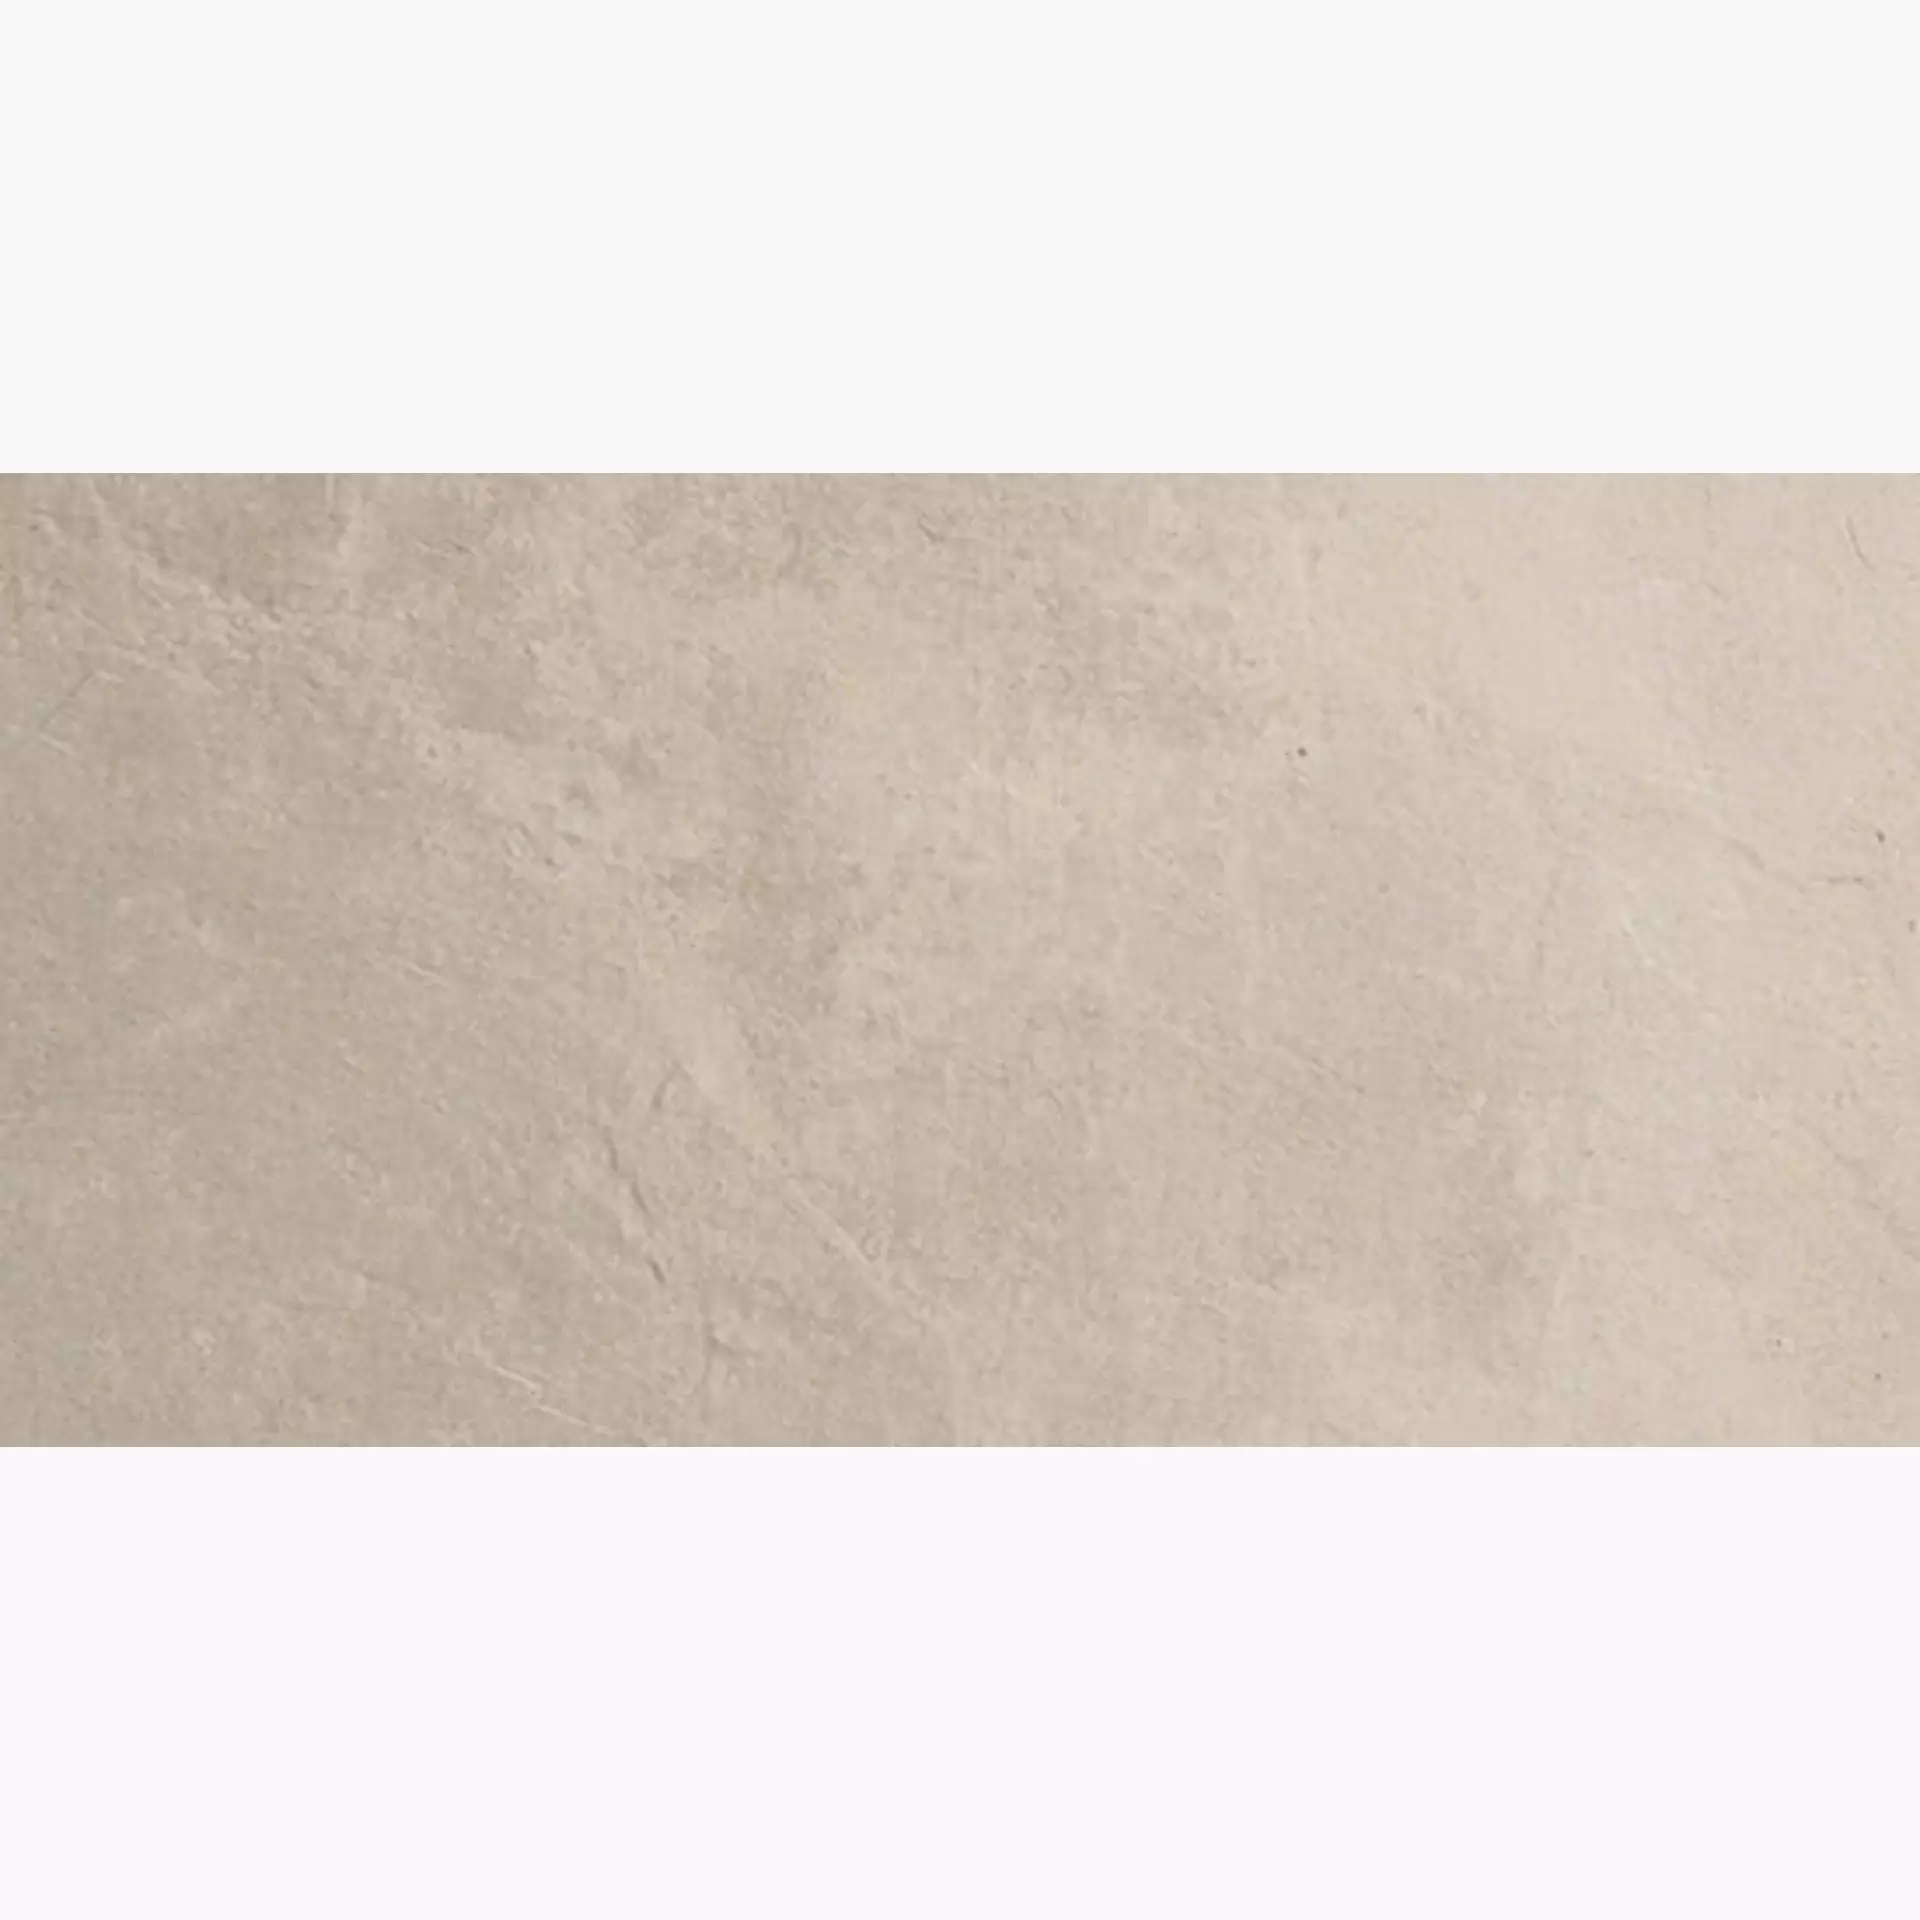 Coem Ardesia Mix Avorio Naturale Base AR371BR 37,5x75cm rectified 10mm